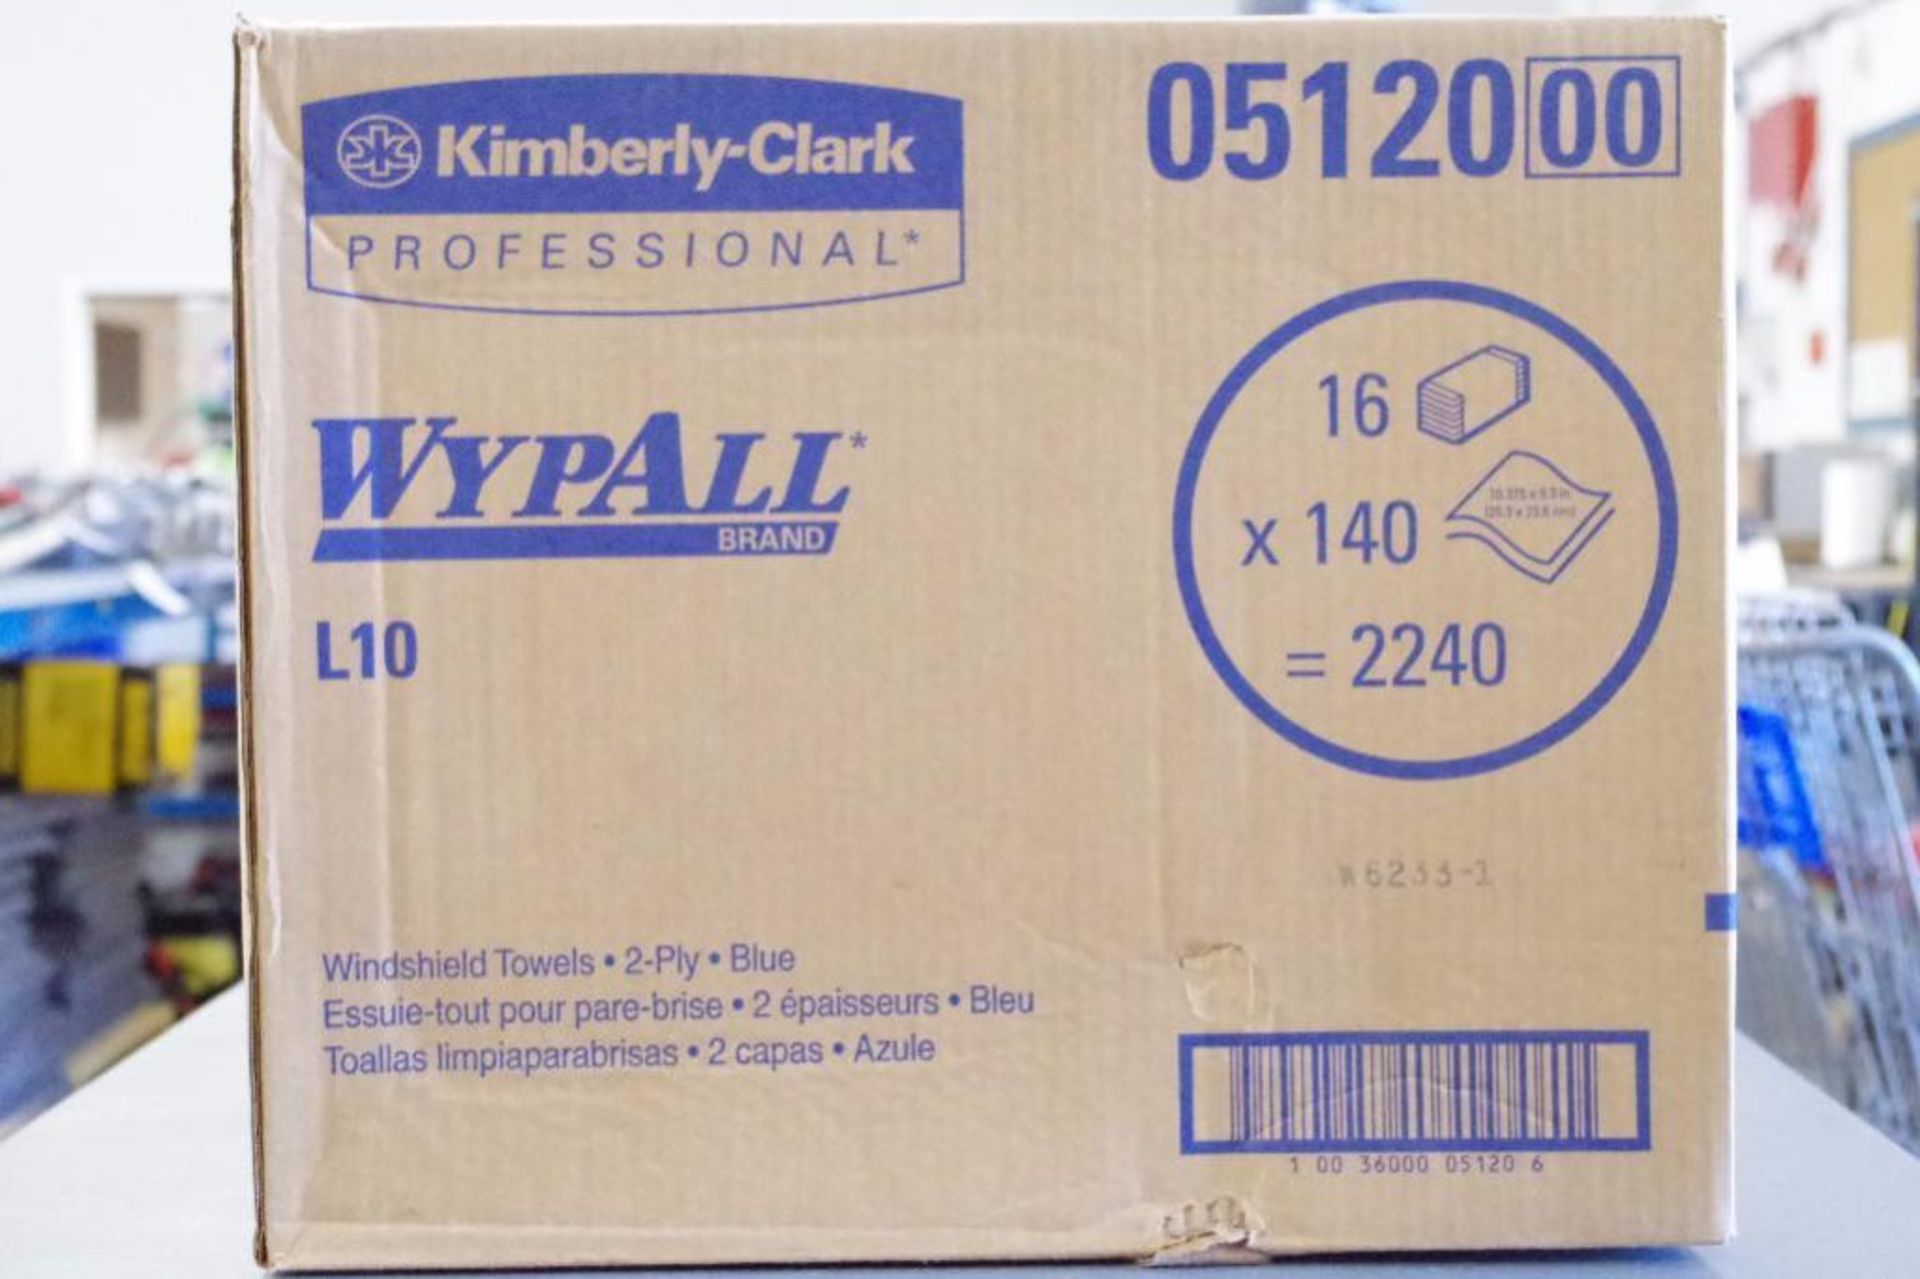 [11,200] KIMBERLY-CLARK Wypall 2-Ply Windshield Towels (5 Cases of 2240) - Image 3 of 3